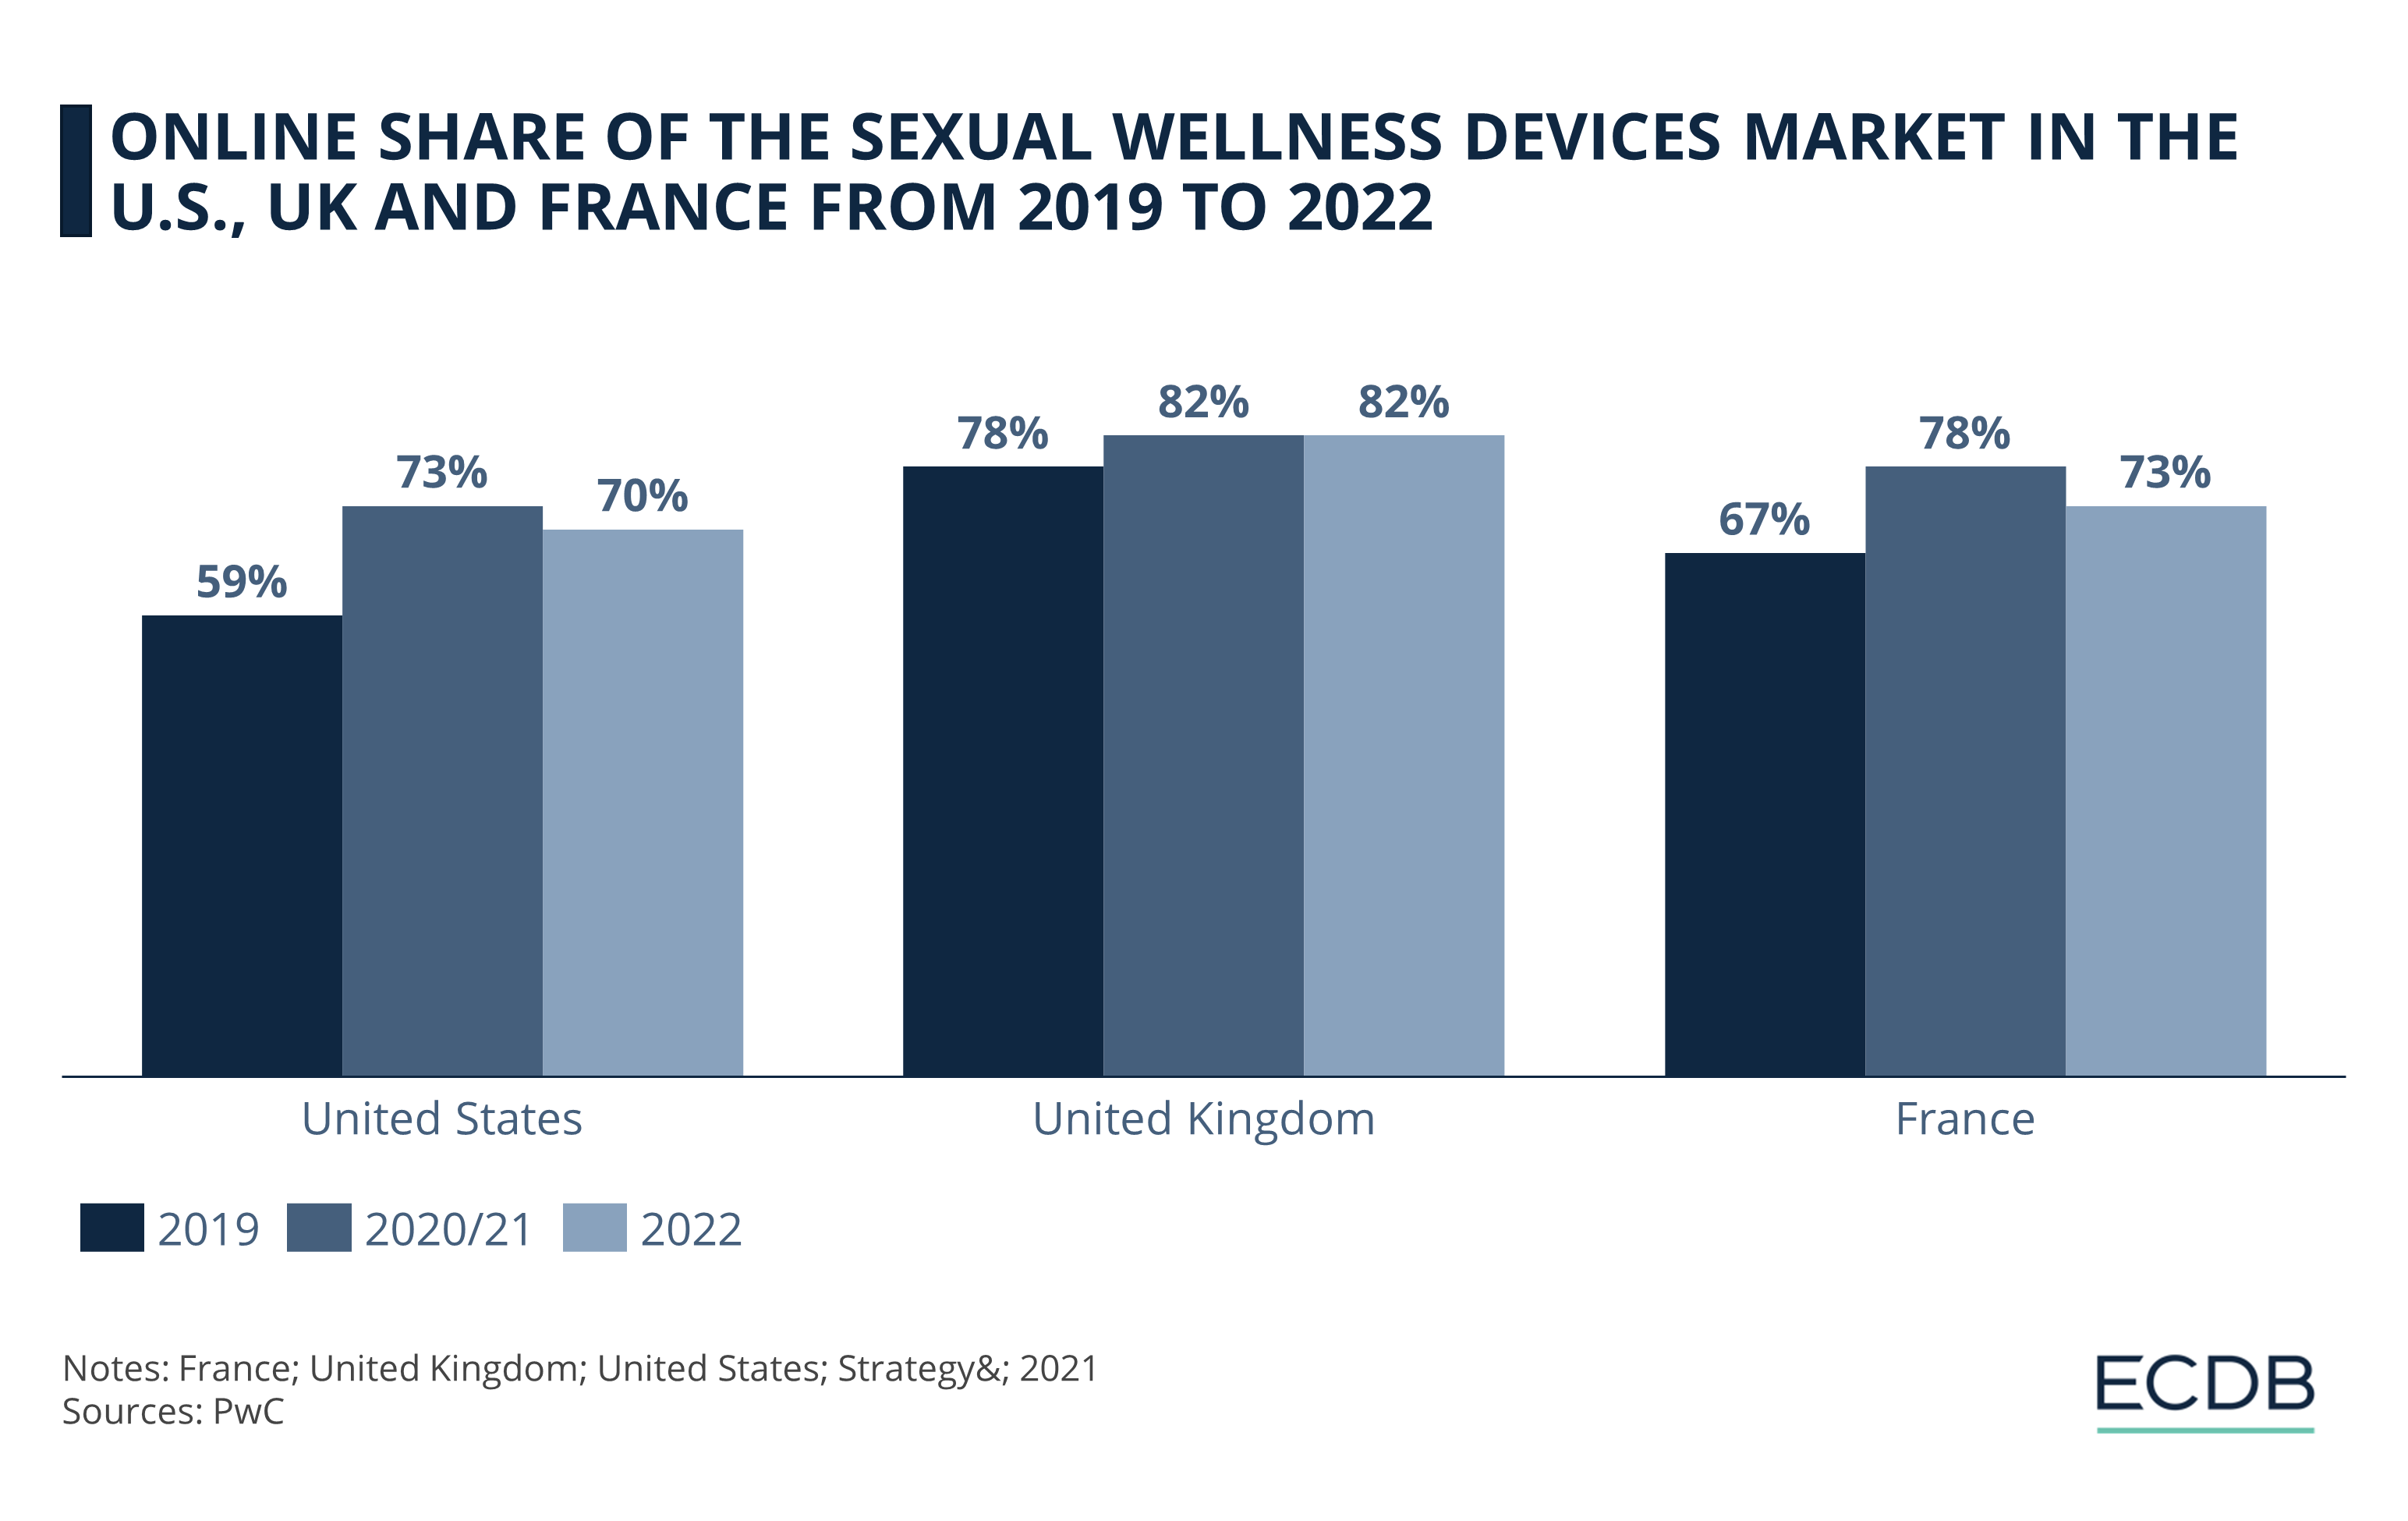 Online Share of the Sexual Wellness Devices Market in the U.S., UK and France From 2019 to 2022